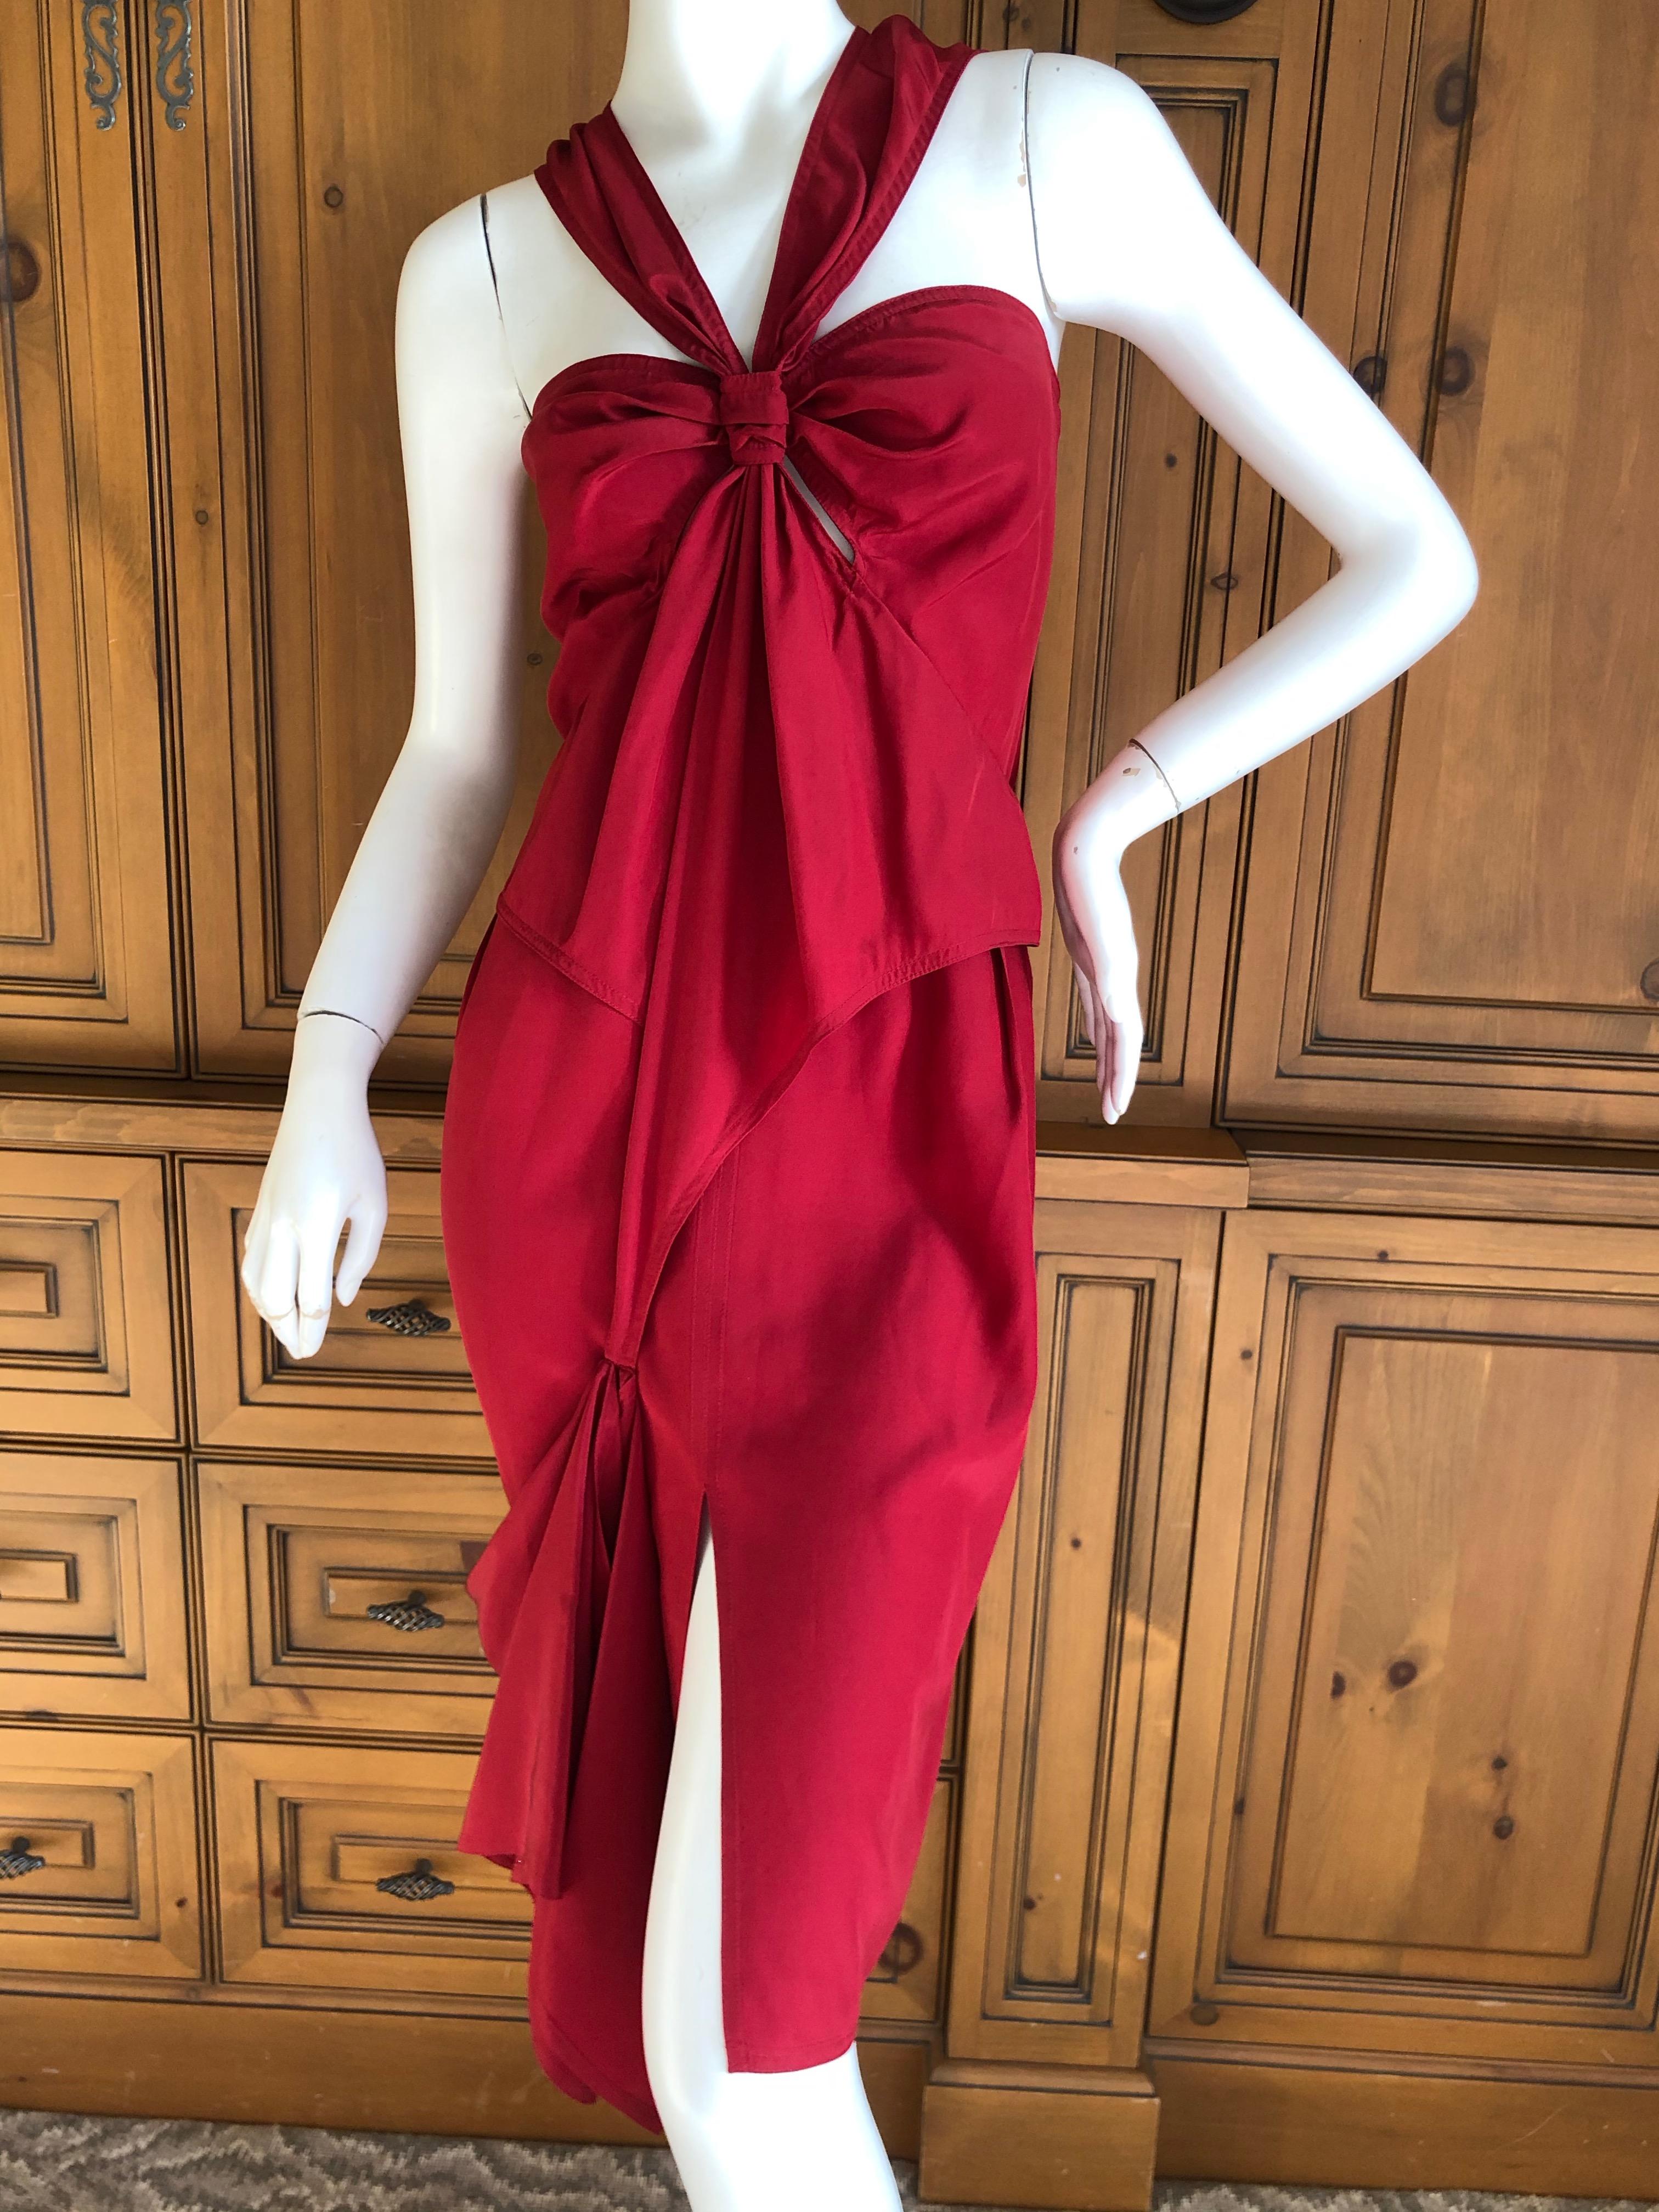 Yves Saint Laurent by Tom Ford Red Silk Keyhole Dress 2003 For Sale 3